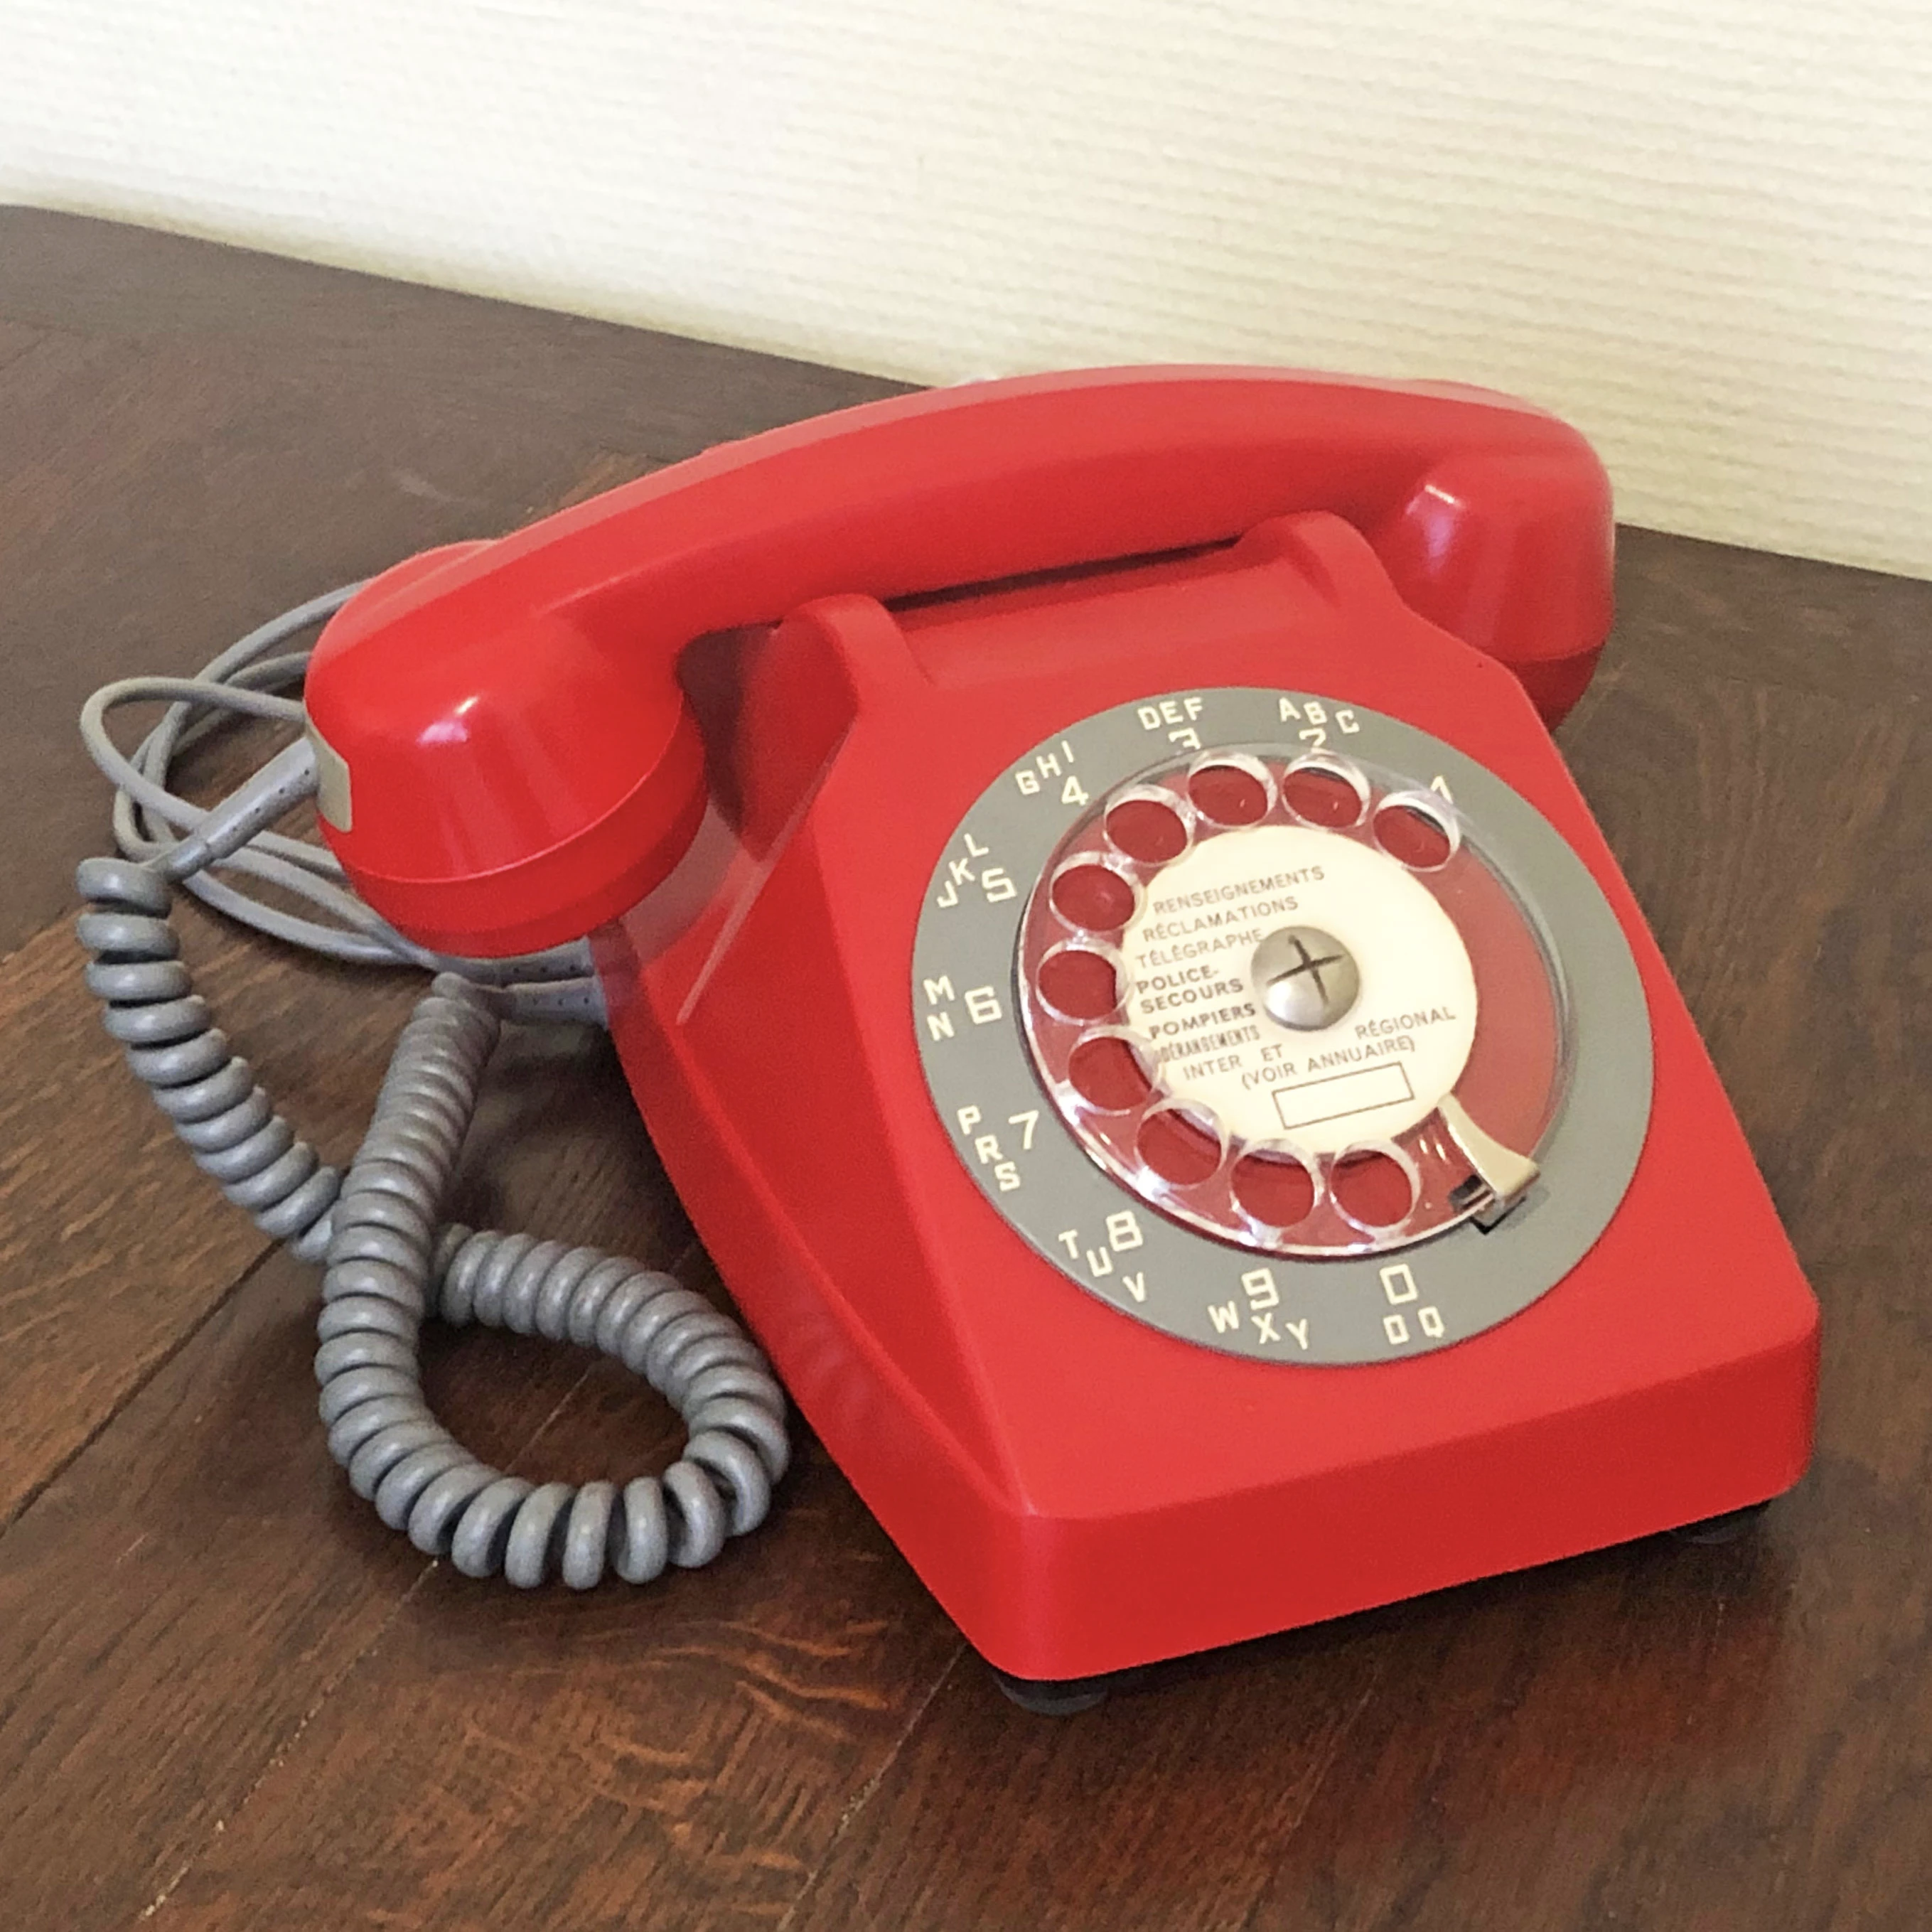 Rotary dial